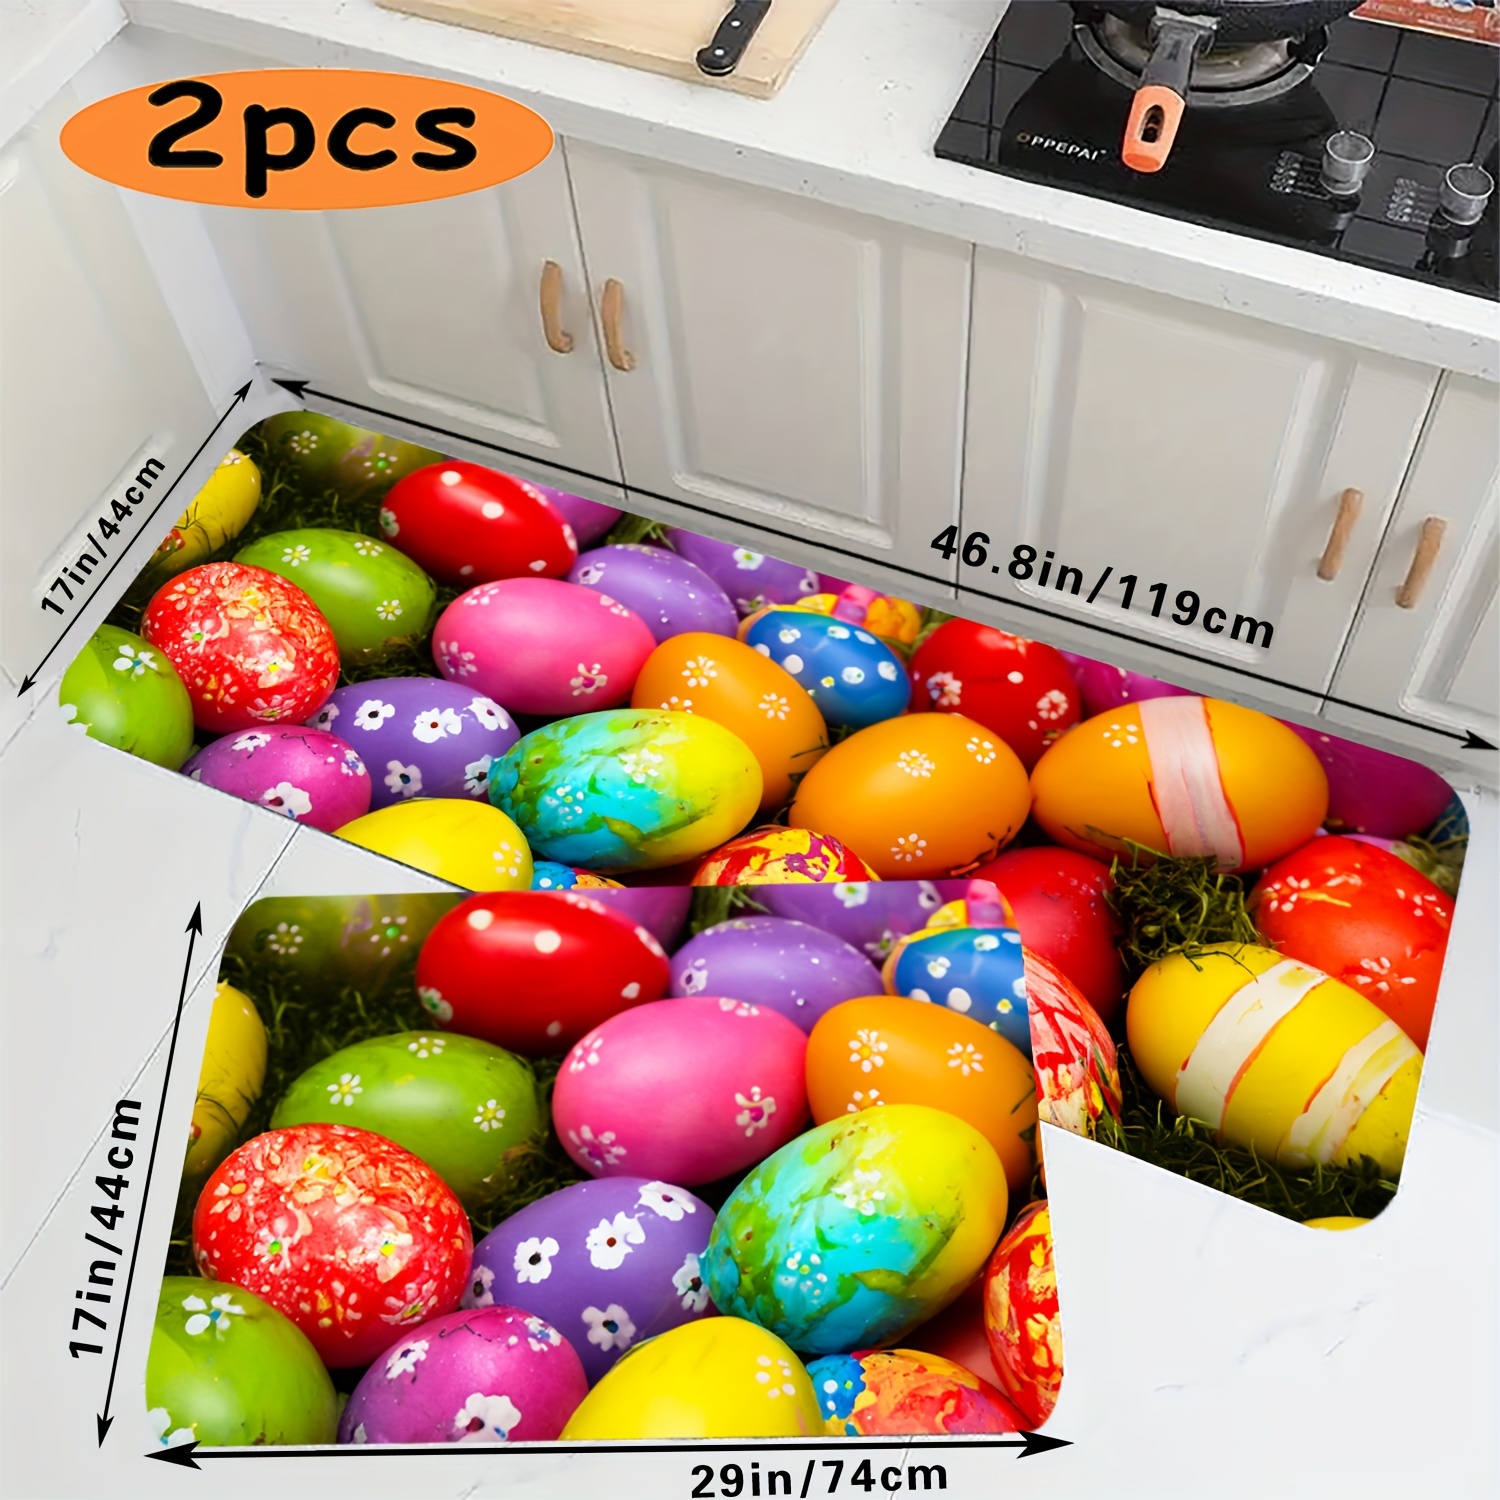 

2pcs Happy Easter Day Non Slip Bathroom Rugs, Colorful Eggs Picture Printed Decorative Kitchen Carpet, Washable Soft Flannel Foot Pad, Living Room Accessories, Home Decor, Room Decor